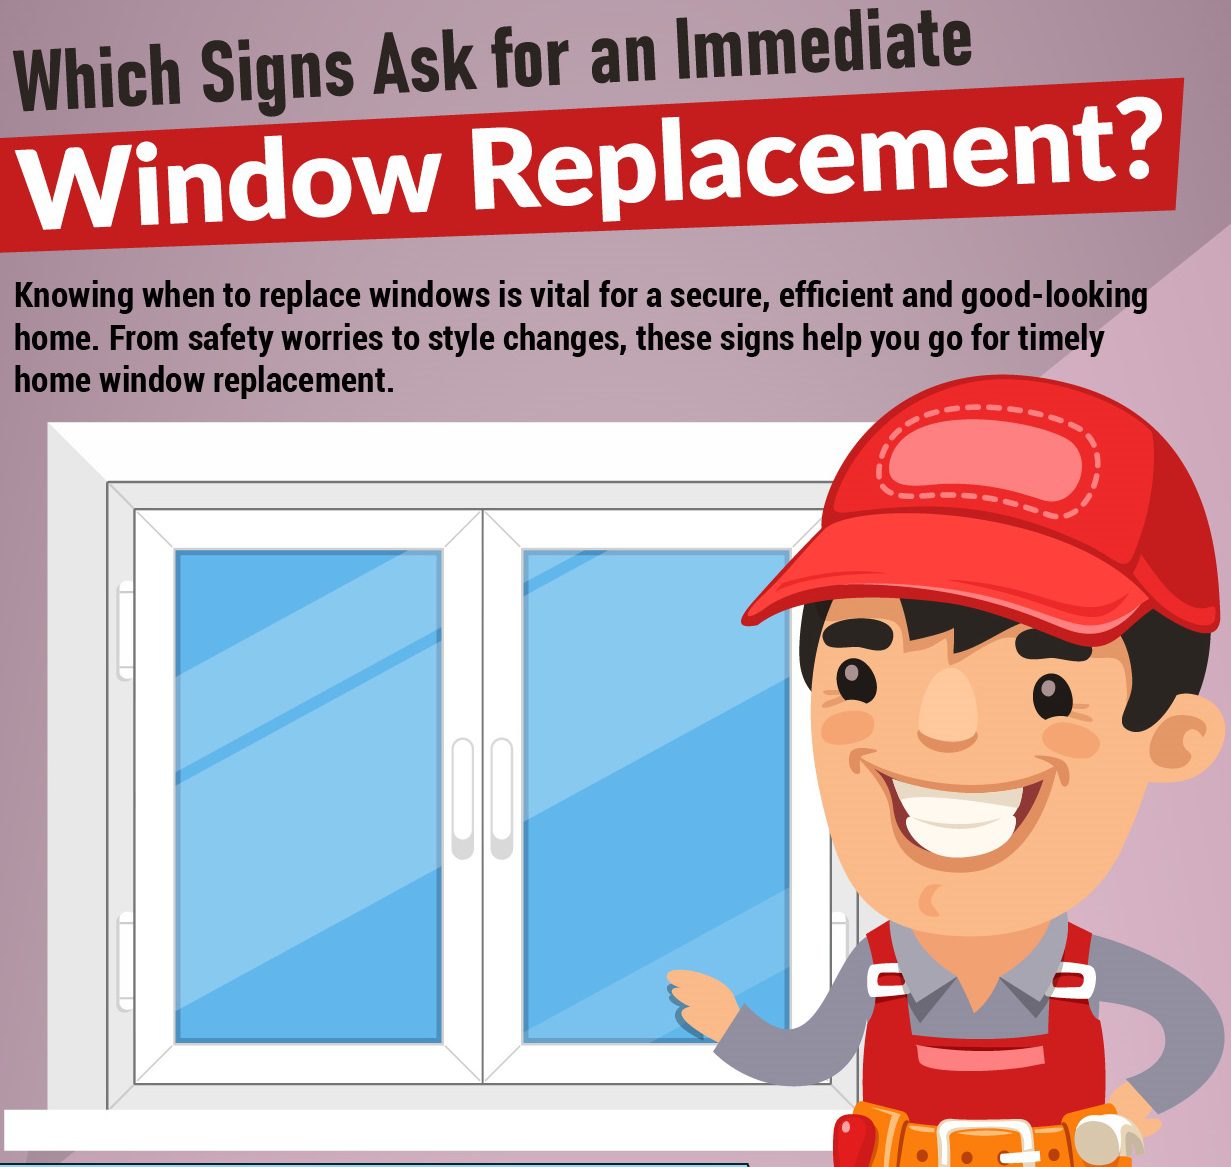 Window Replacement guide with infographic from Red River Roofing